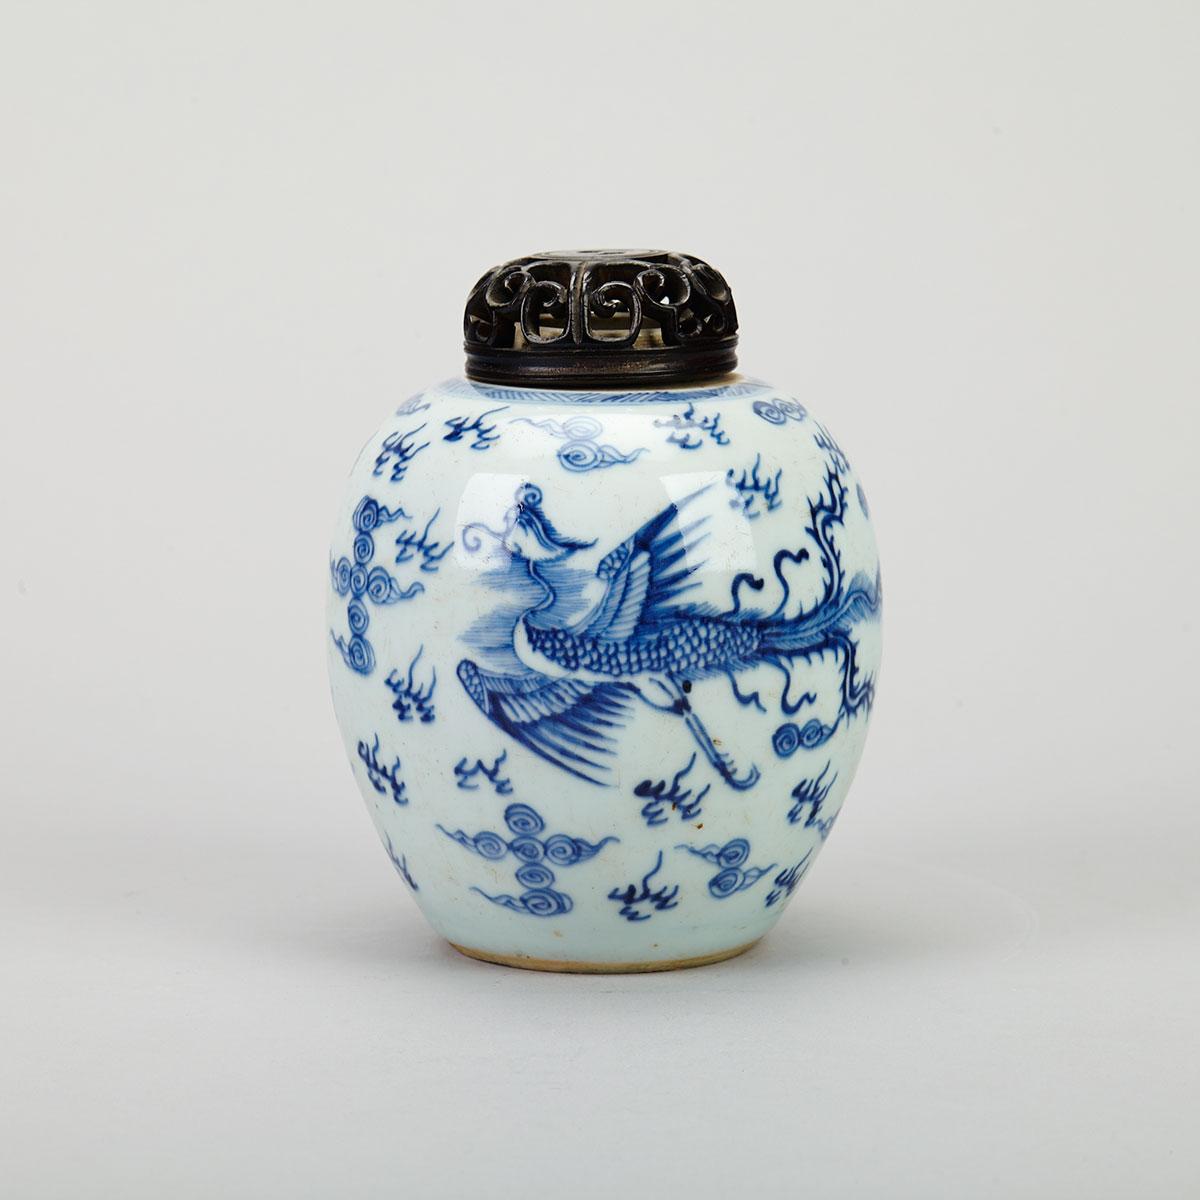 Blue and White ‘Double Phoenix’ Ginger Jar, Kangxi Period (1662-1722)